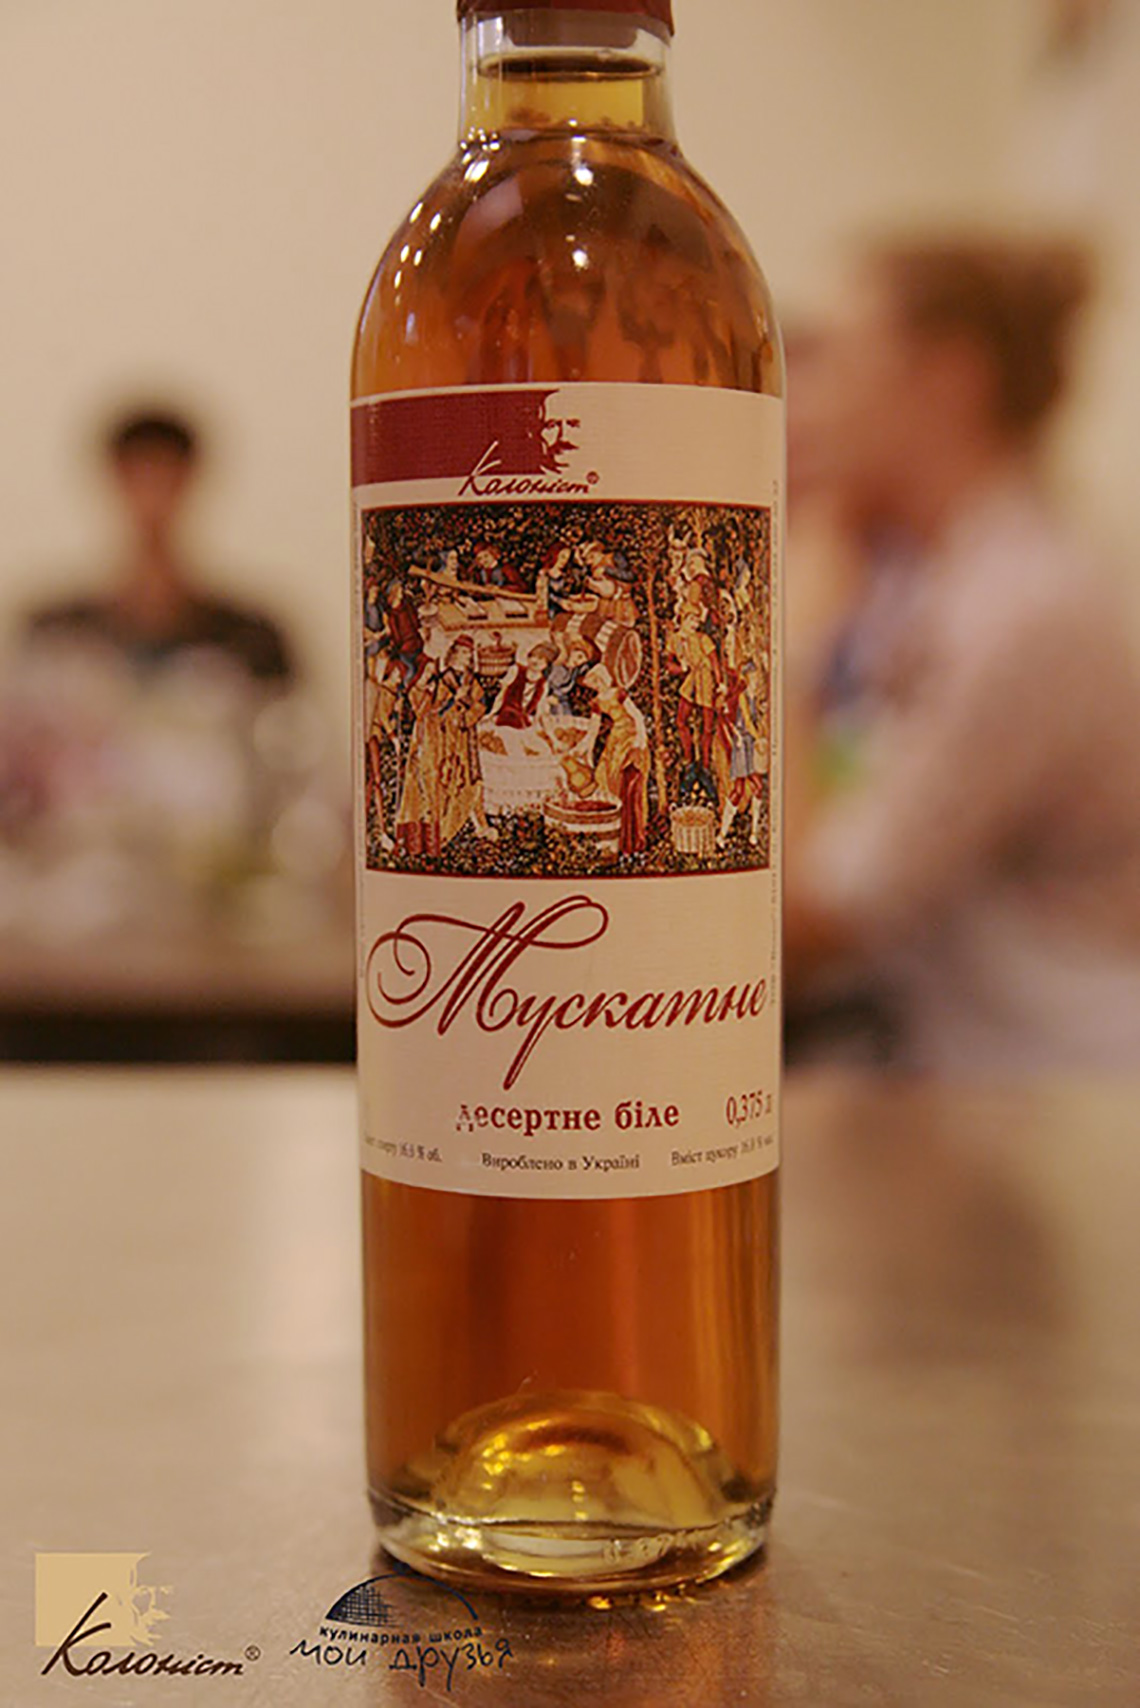 Muskat wine. Lesson “Sunday Roast”. Cooking class at “My Friends” cooking school in Odessa.